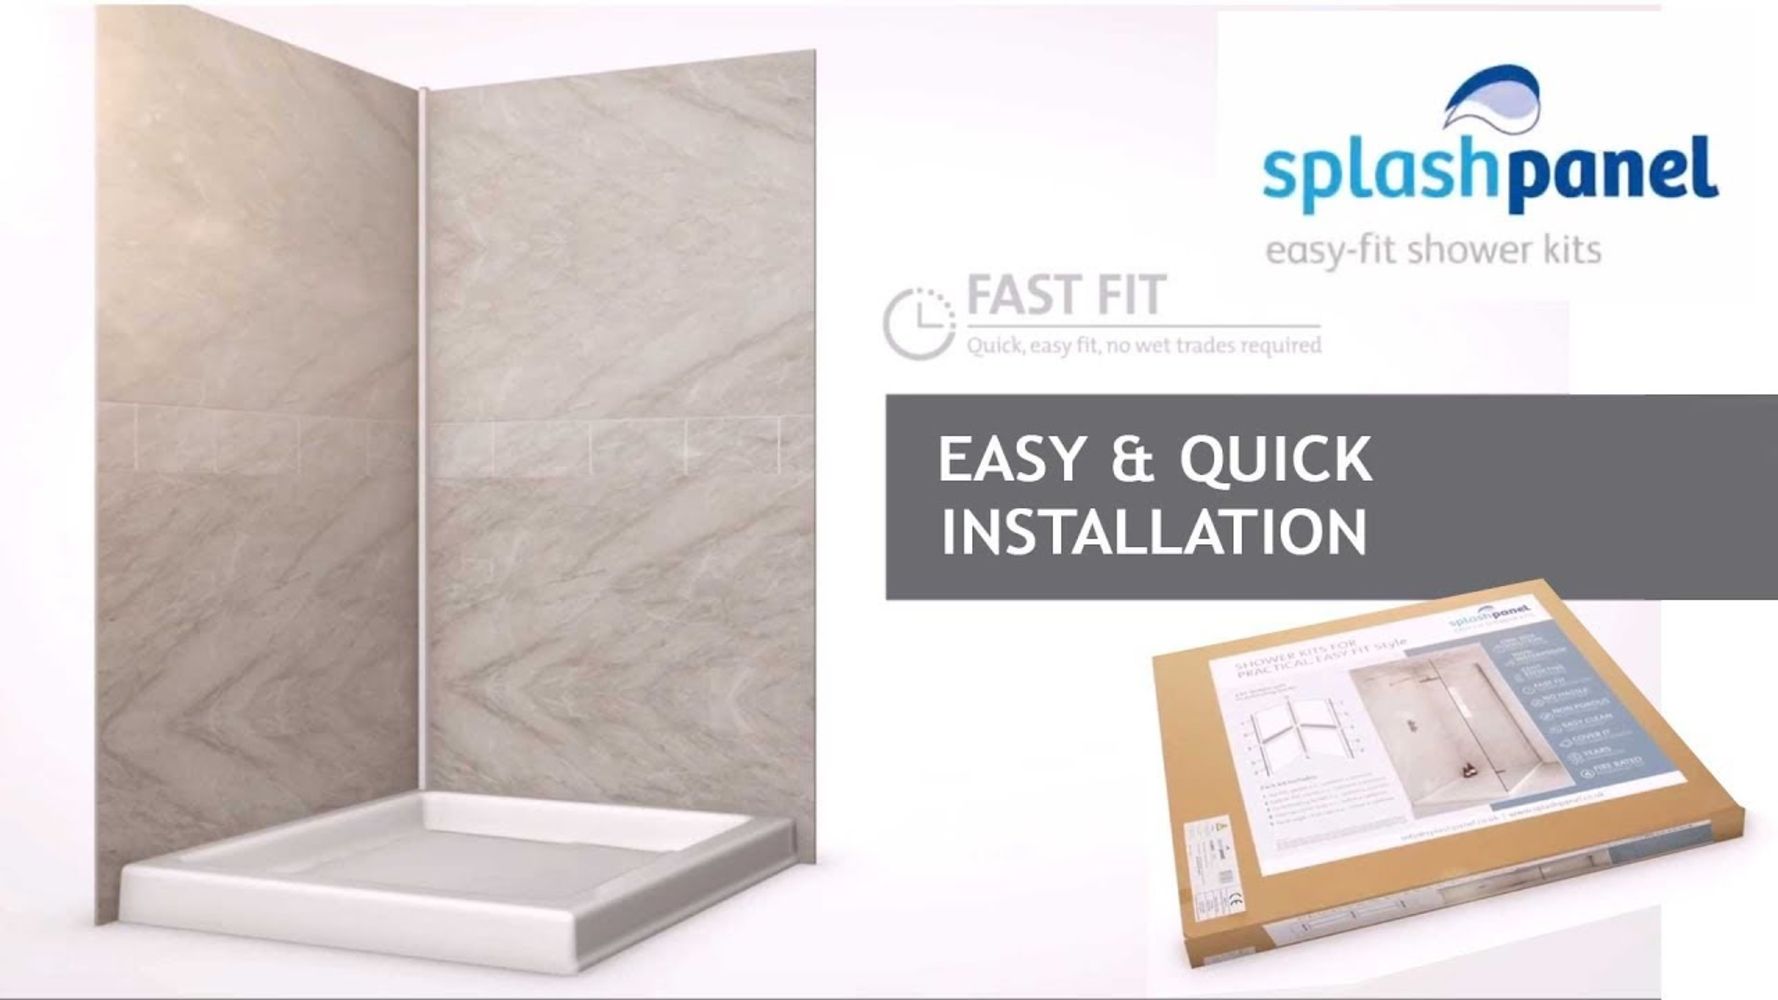 Pallets of Splash Panel shower wall panel kits, brand new, RRP £195 each and starting at £100 for 12!!!!